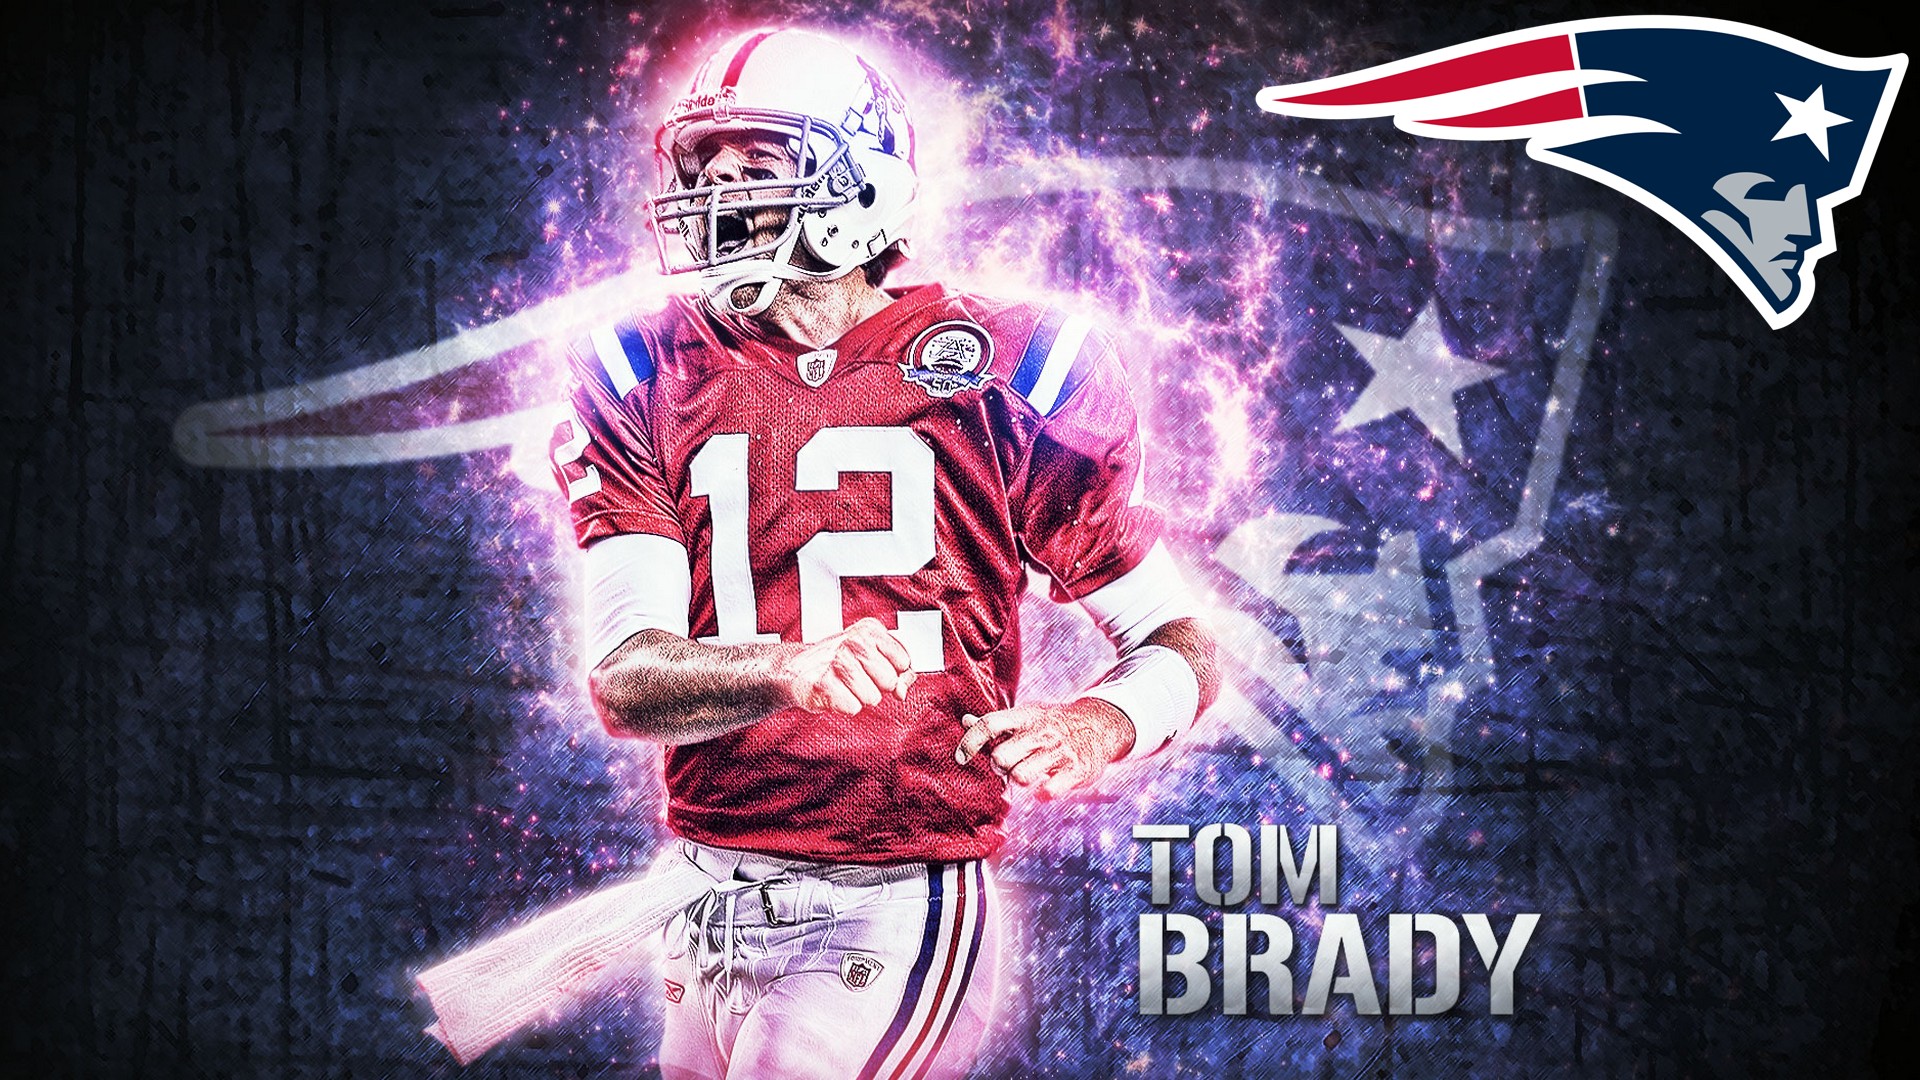 Tom Brady Patriots Mac Backgrounds with resolution 1920x1080 pixel. You can make this wallpaper for your Mac or Windows Desktop Background, iPhone, Android or Tablet and another Smartphone device